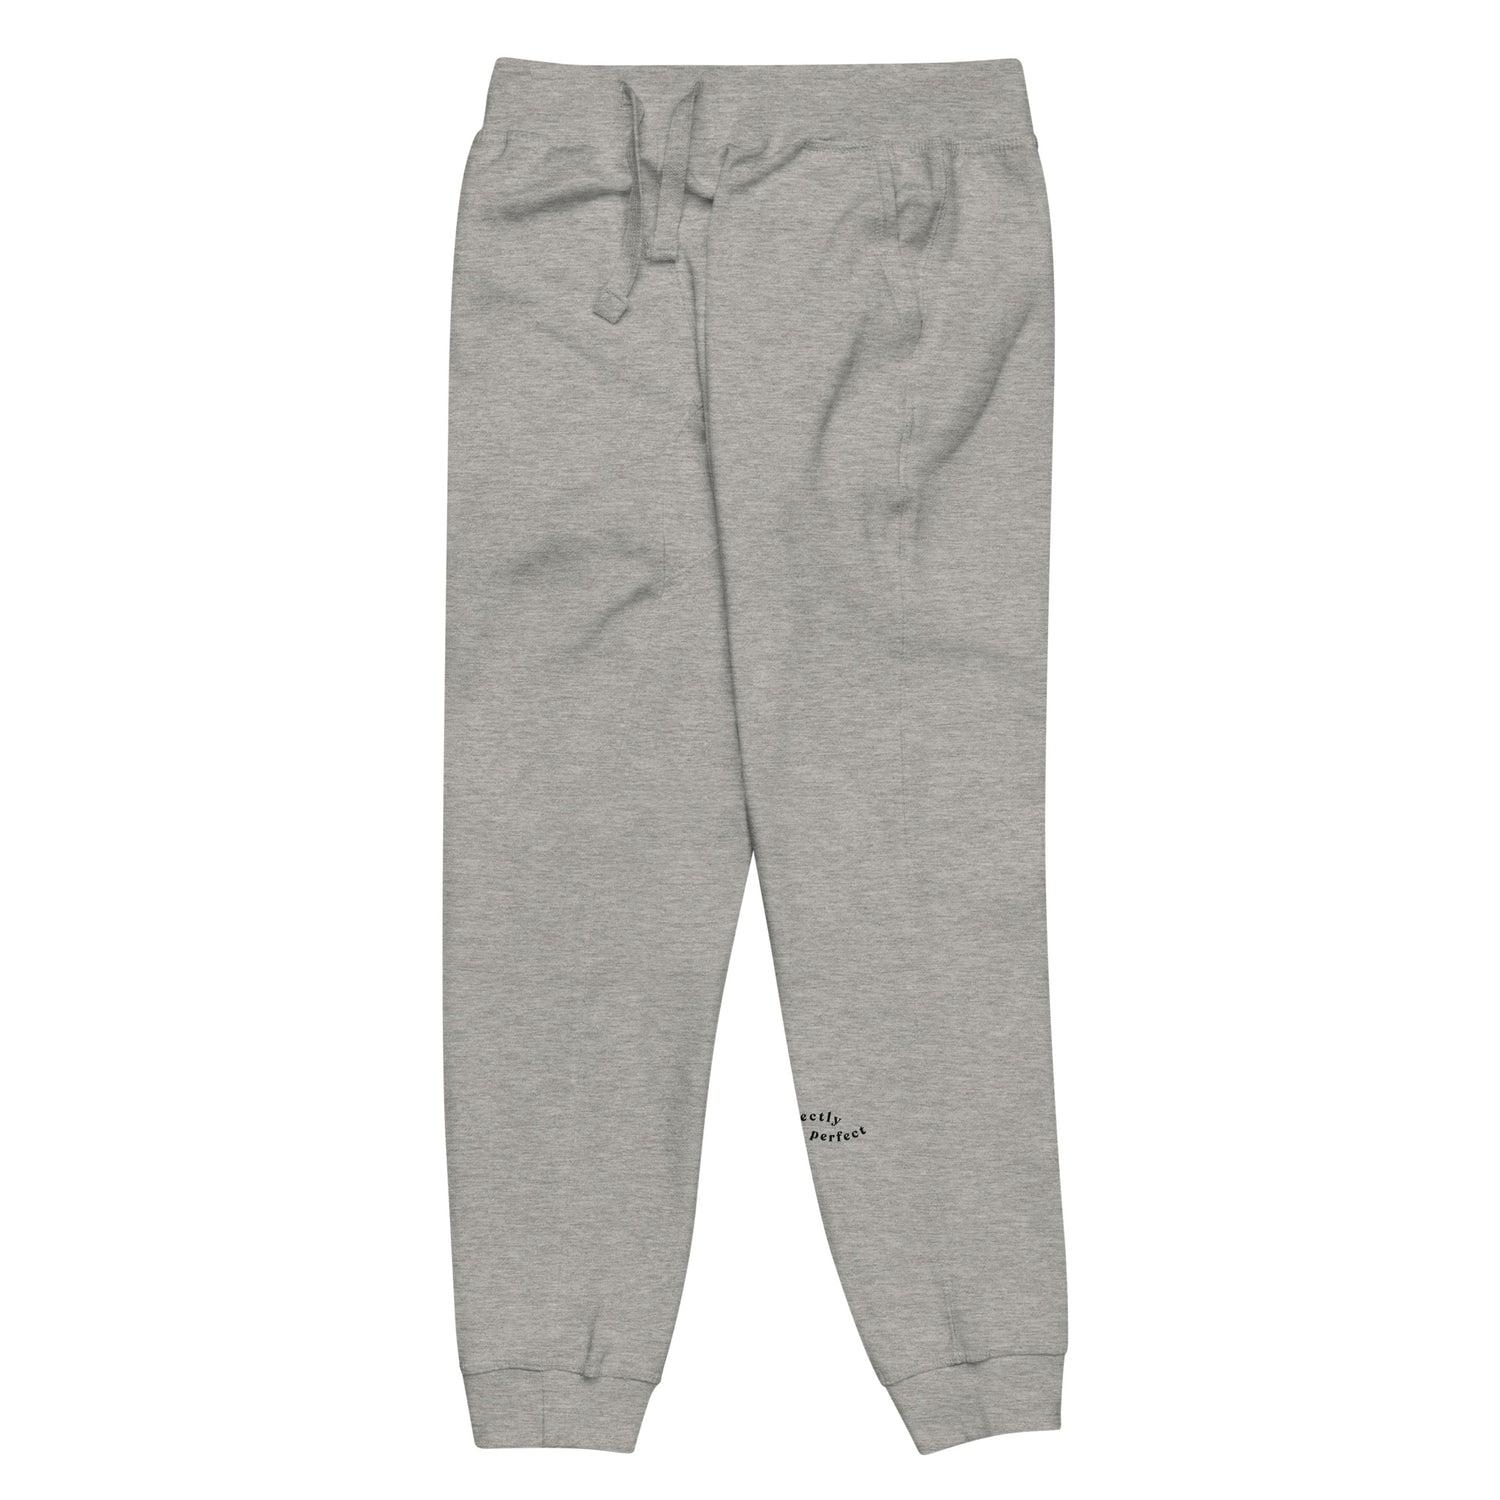 Side of full length Grey sweat pant with pockets on side, featuring "Imperfectly perfect" printed on left side lower leg.